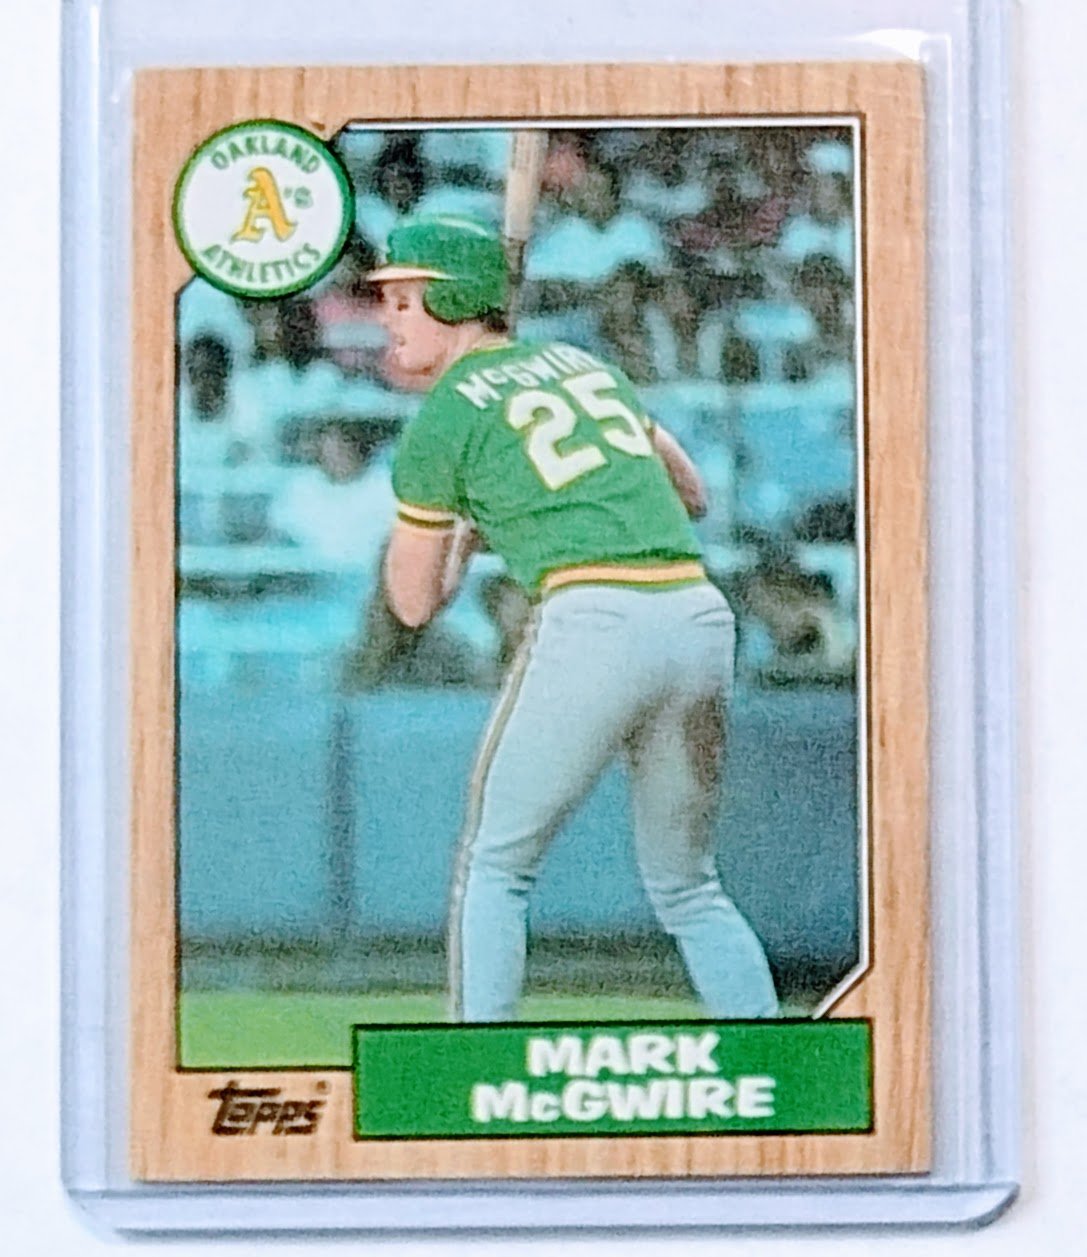 1987 Topps Mark McGwire Baseball Trading Card TPTV simple Xclusive Collectibles   